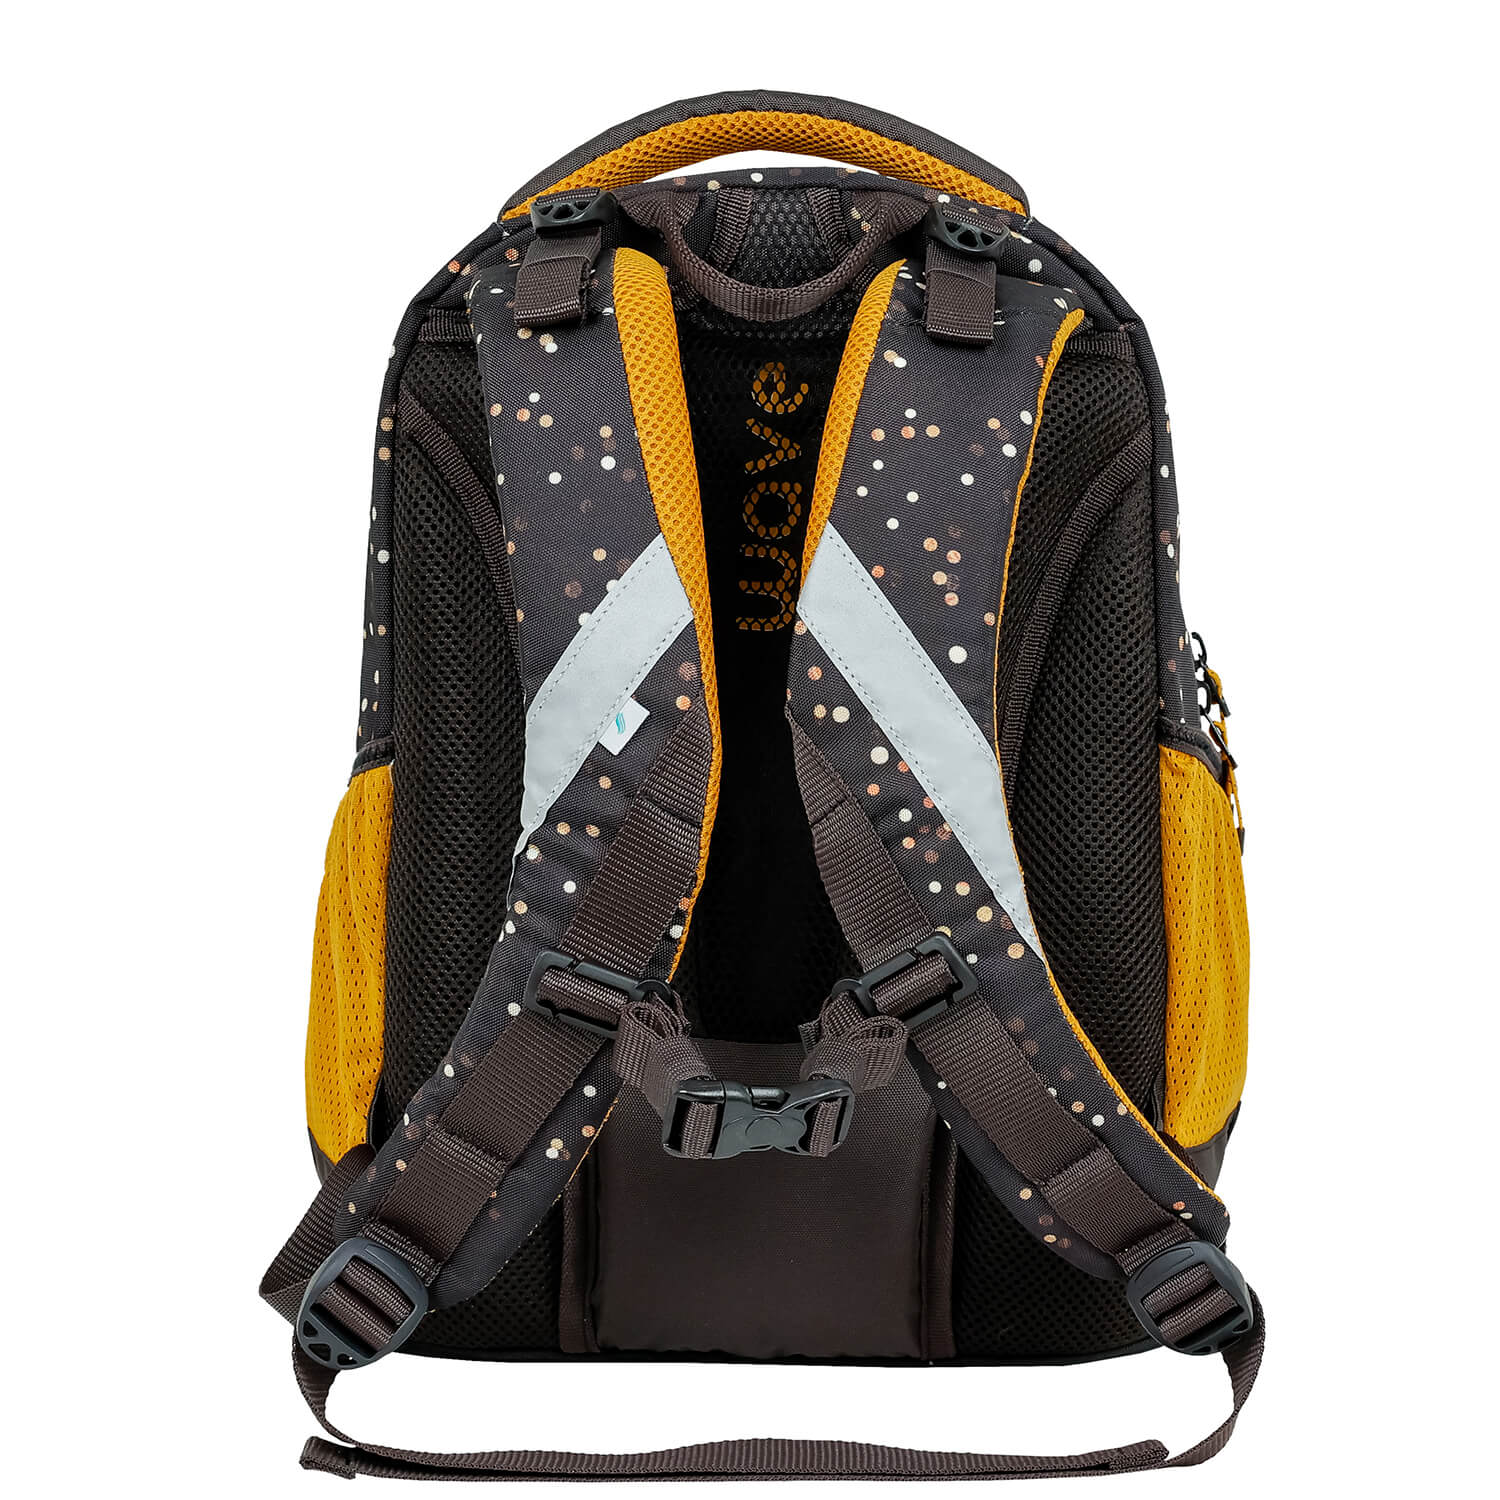 Wave Boost Dots Sand school backpack